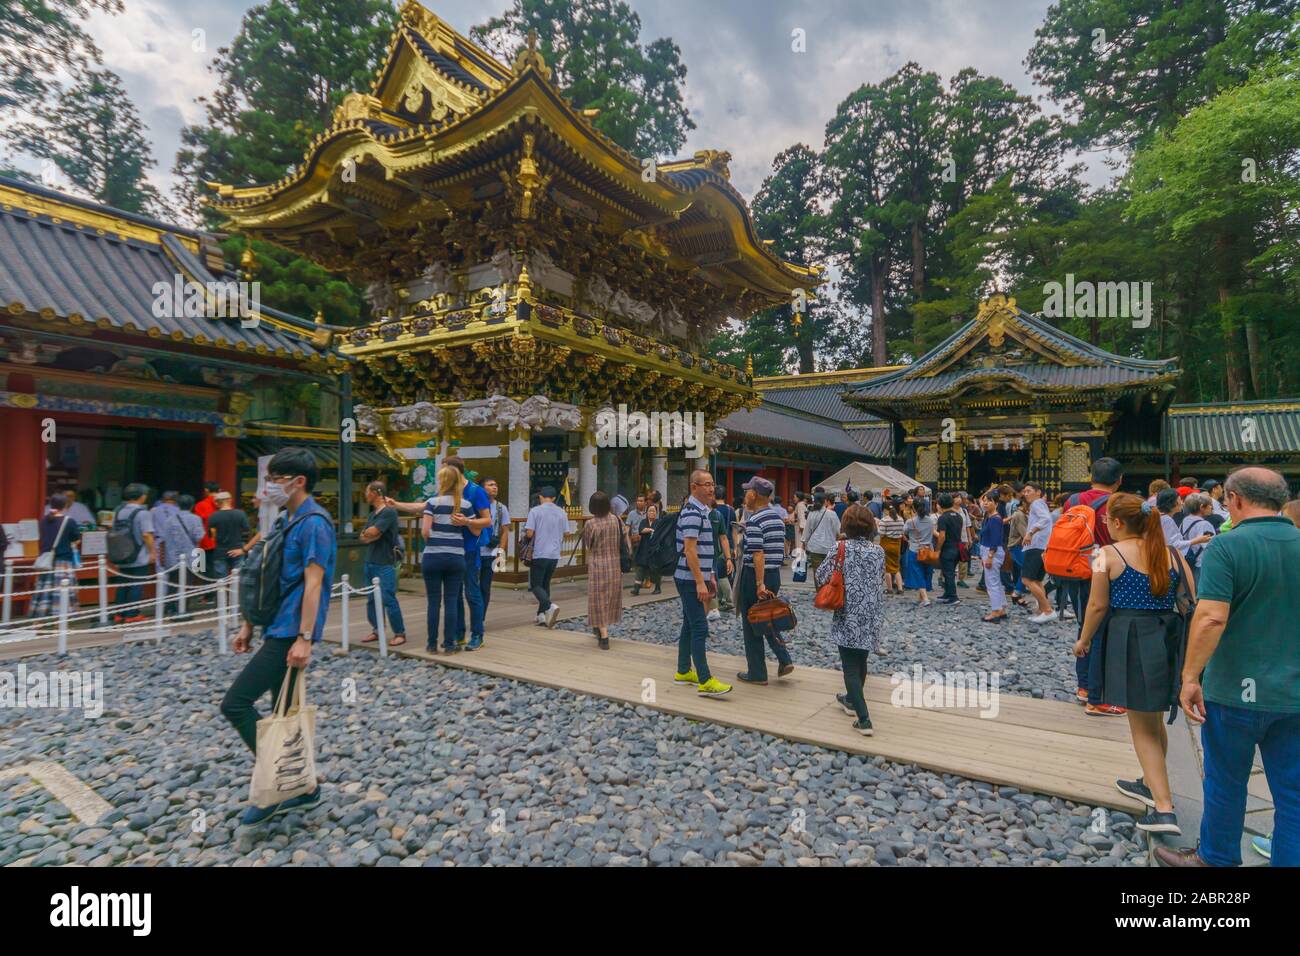 Nikko, Japan - September 29, 2019: View of the compound of Tosho-gu shrine, with visitors, in Nikko, Japan Stock Photo